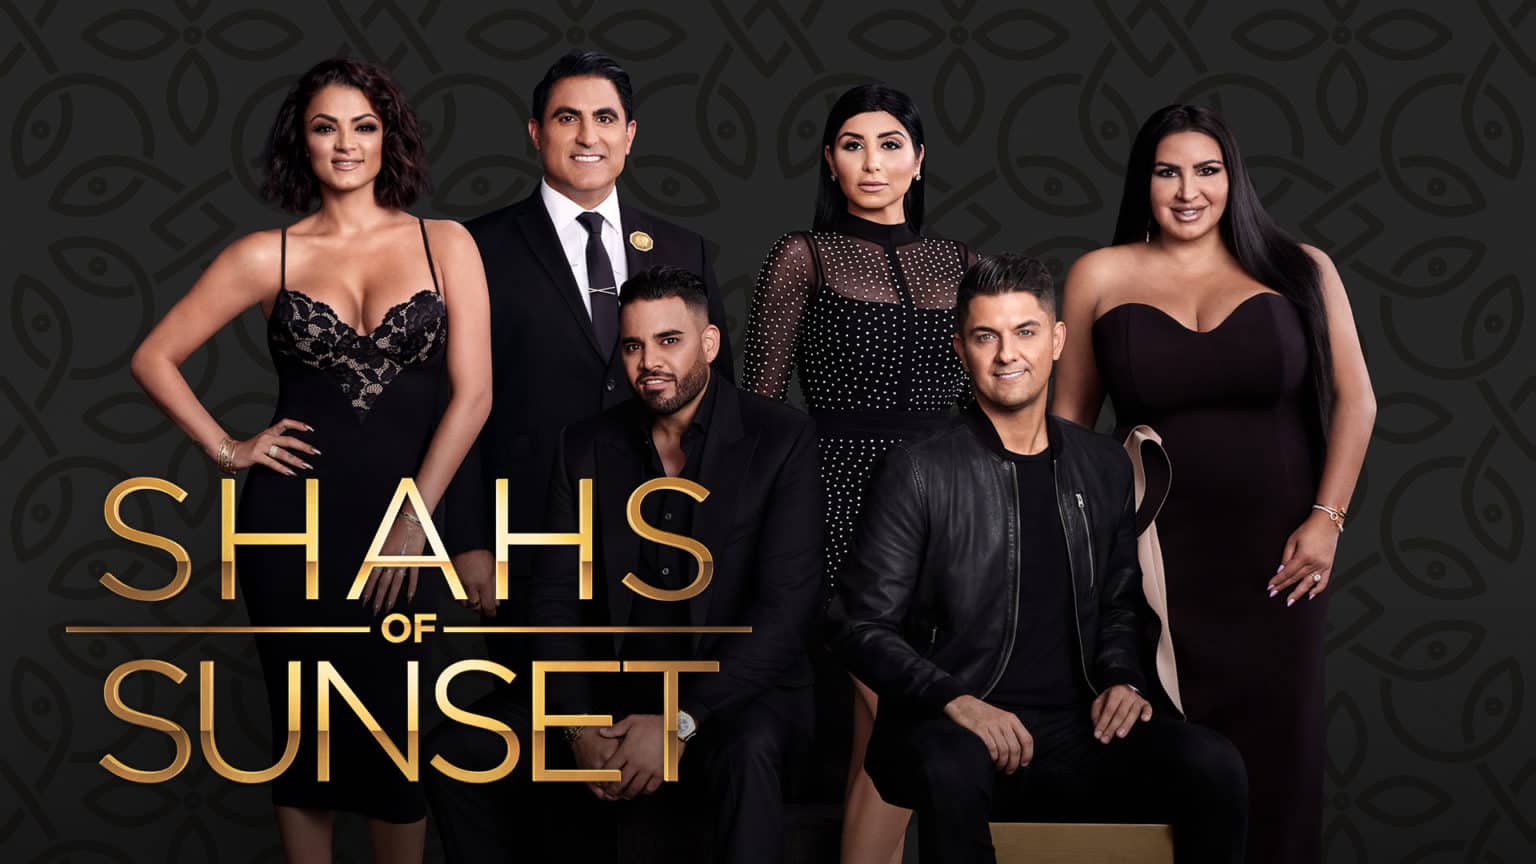 All About The Cast of “Shahs of Sunset” BuddyTV